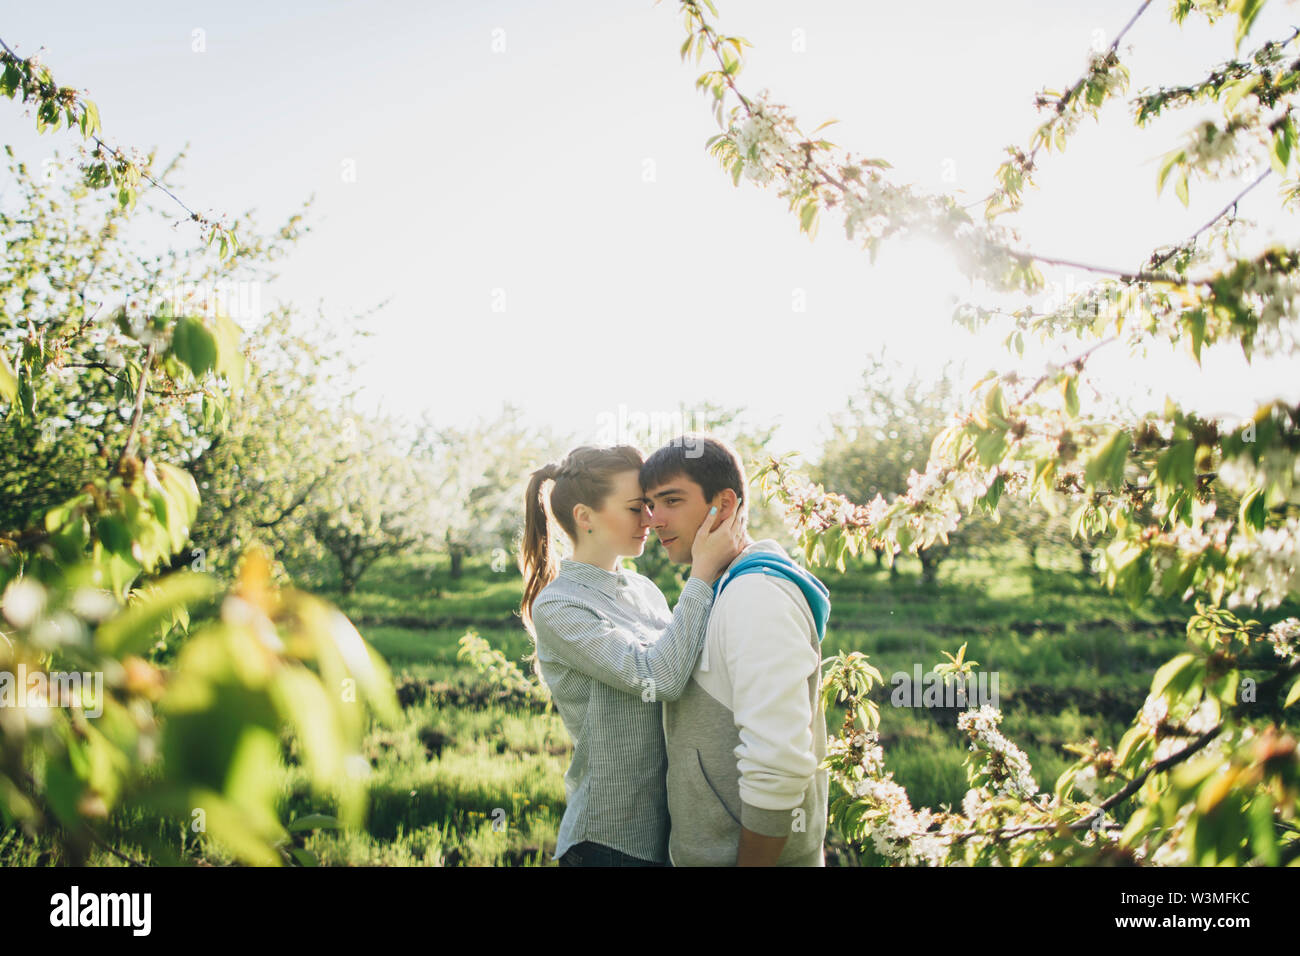 Young couple embracing by trees Stock Photo